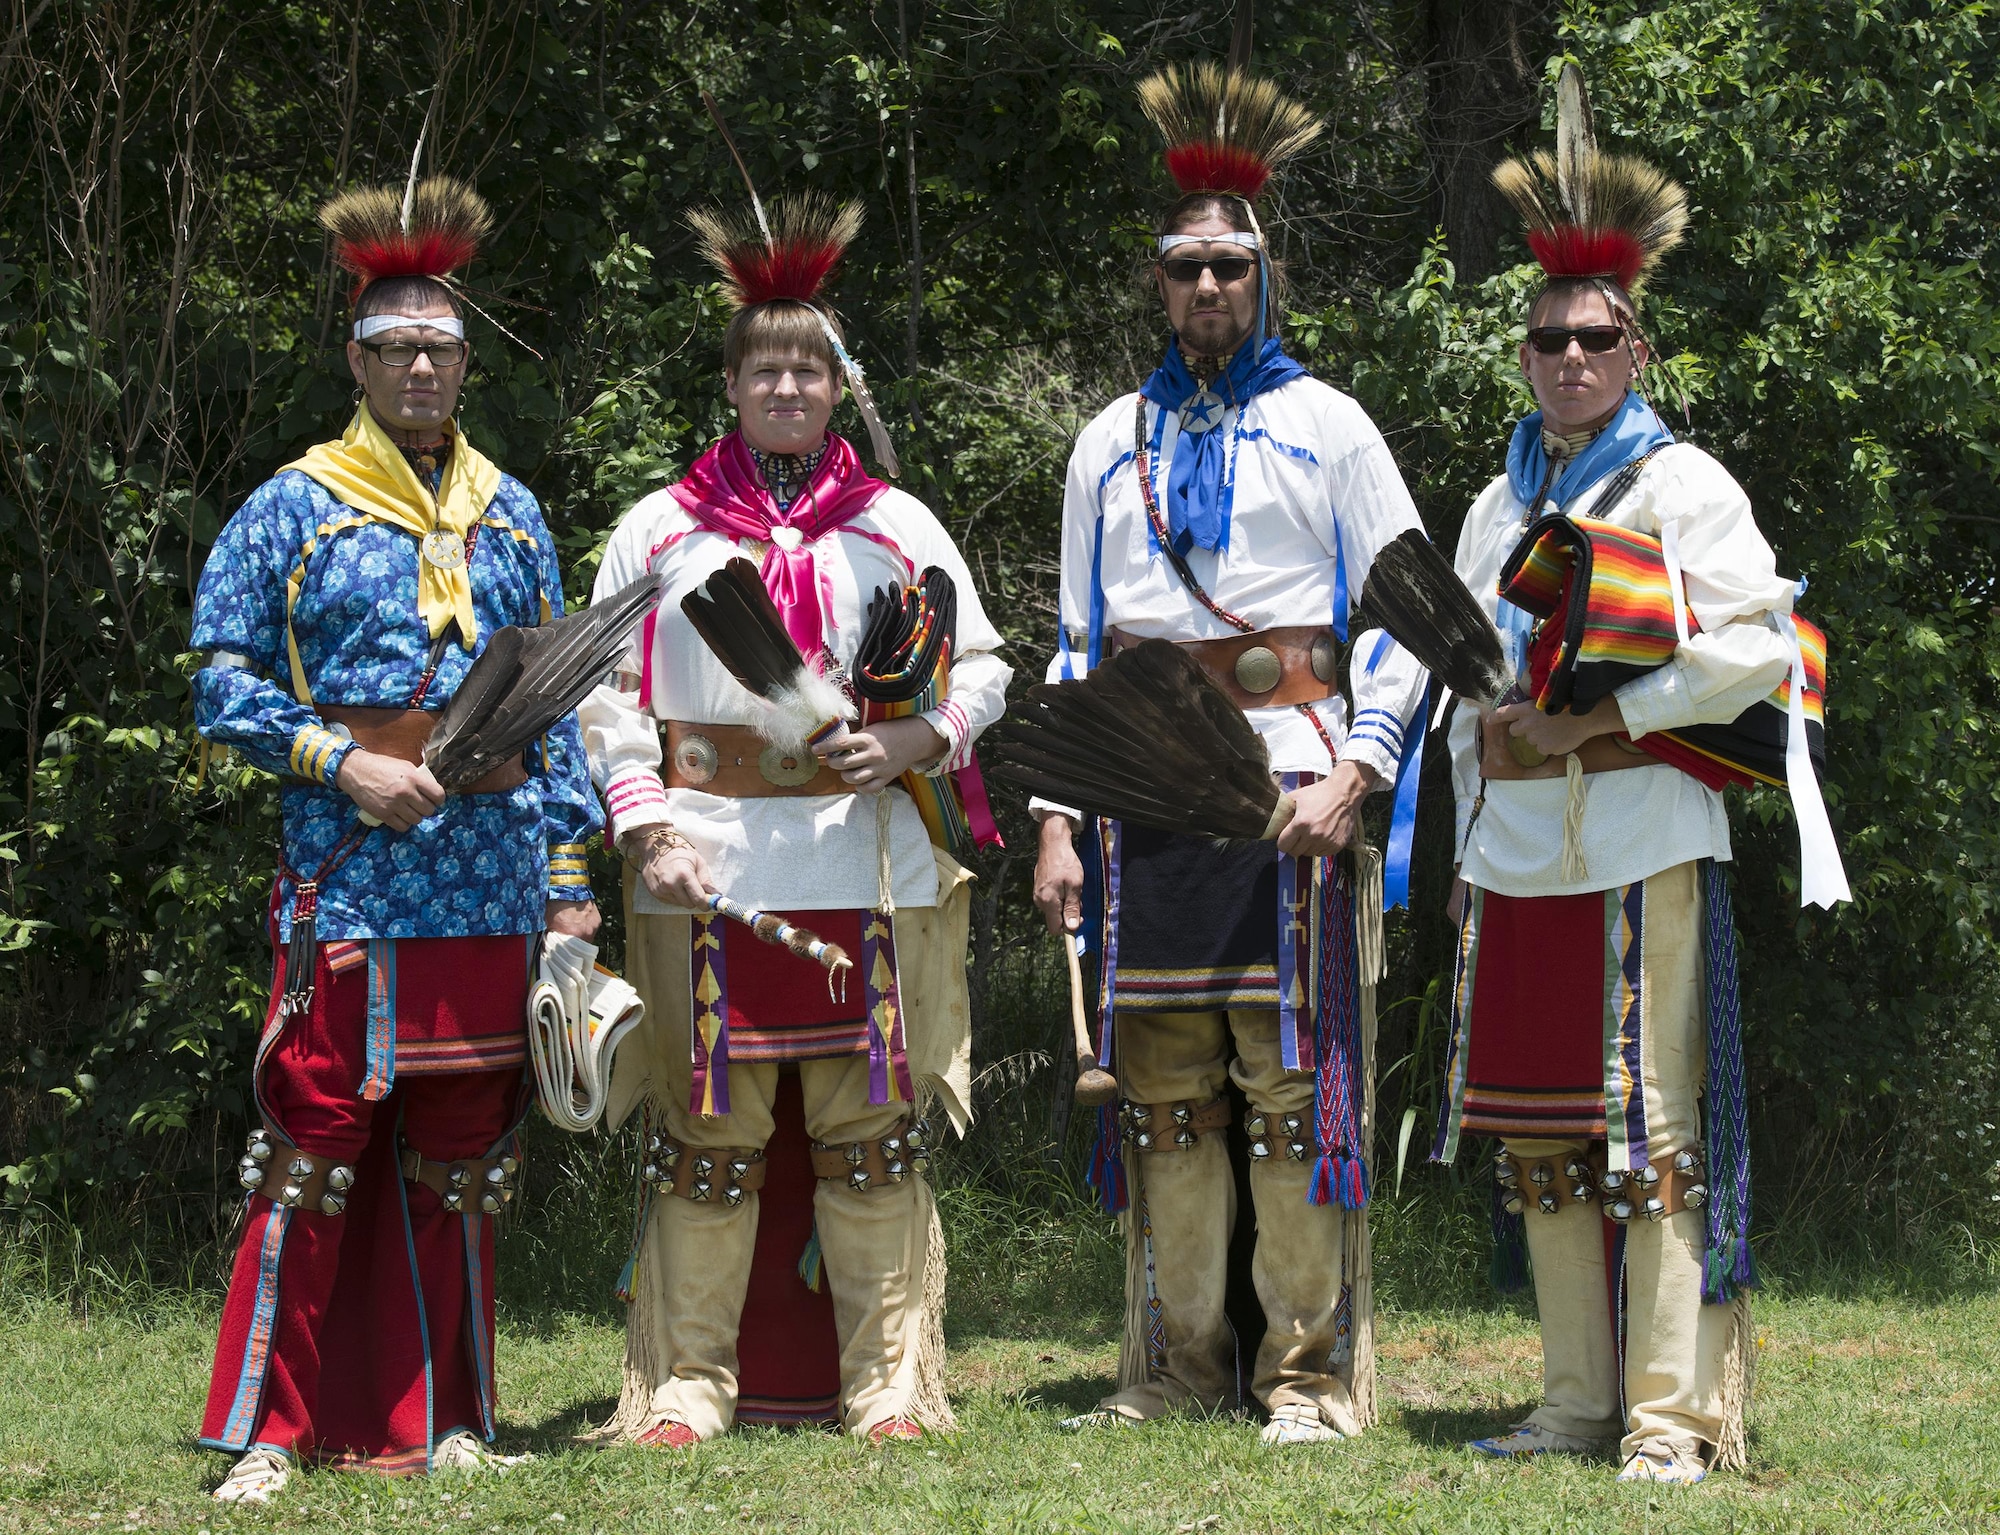 Osage Nation relatives of Maj. Gen. Clarence L. Tinker, dressed in native attire, sing and dance to a song written to Tinker during their annual four day celebration called In-lon-shka held in Pawhuska Indian Village, Okla., June 30, 2013. Tinker was the highest ranking officer of Native-American ancestry and the first general lost in action during World War II. 